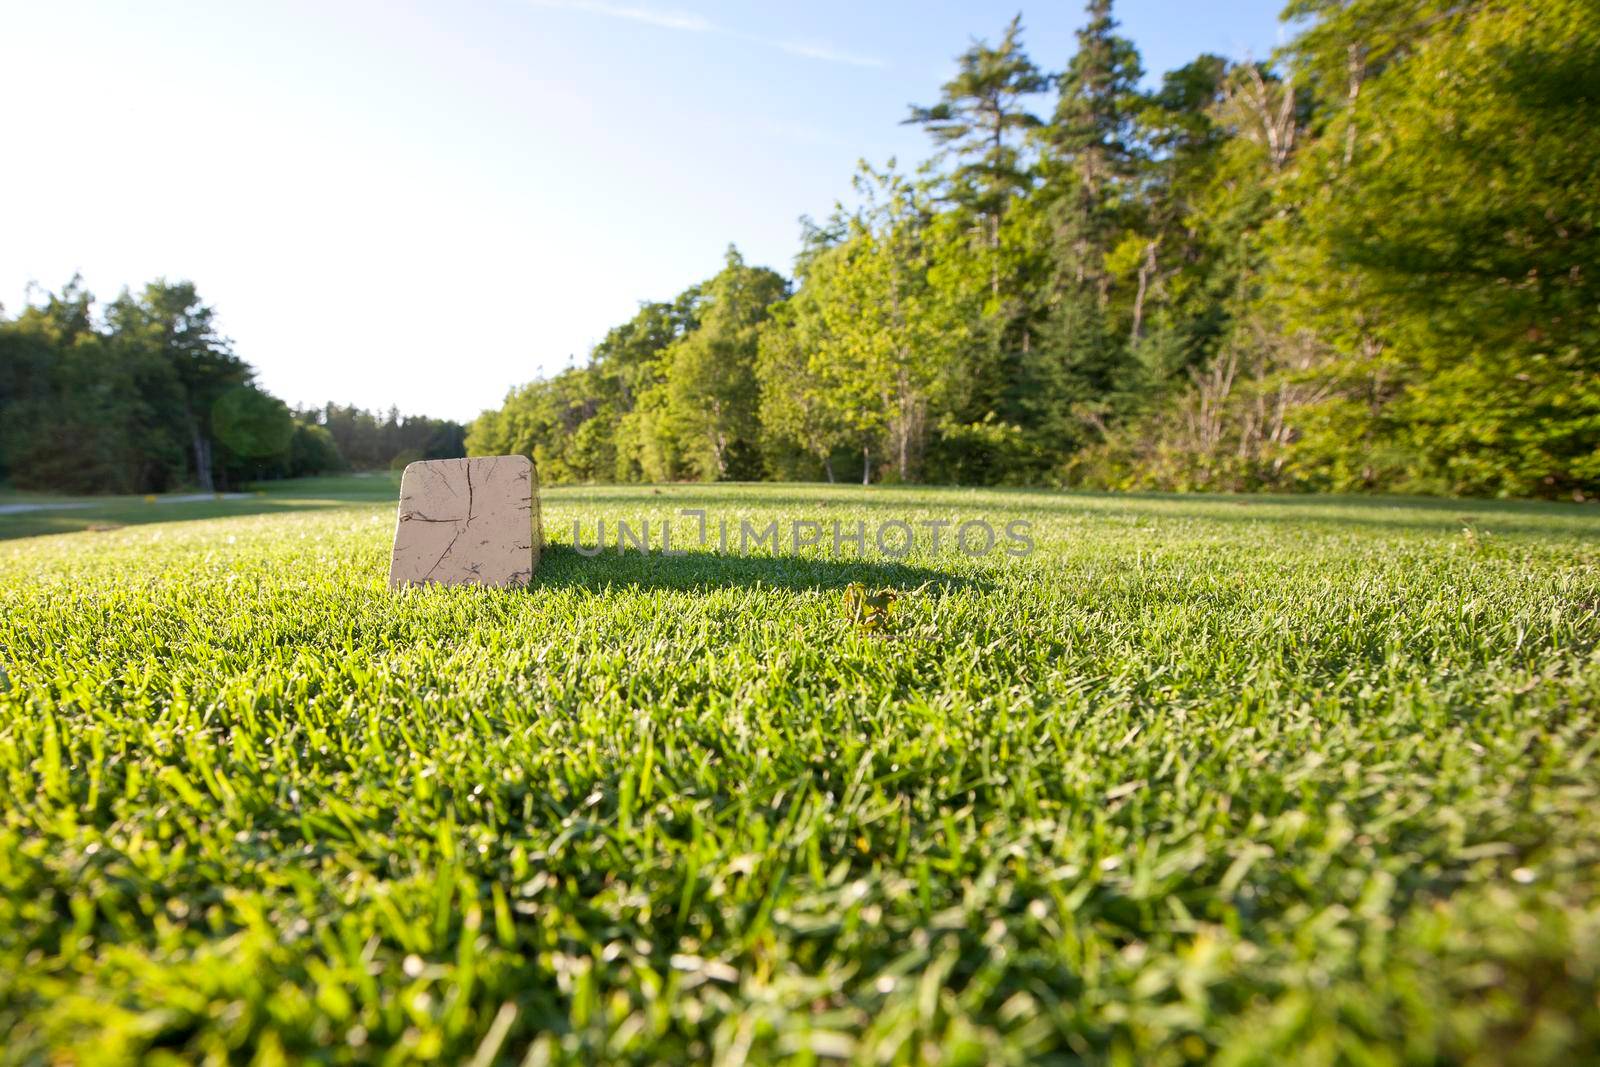  A tee box on the golf course with copy space in the grass 